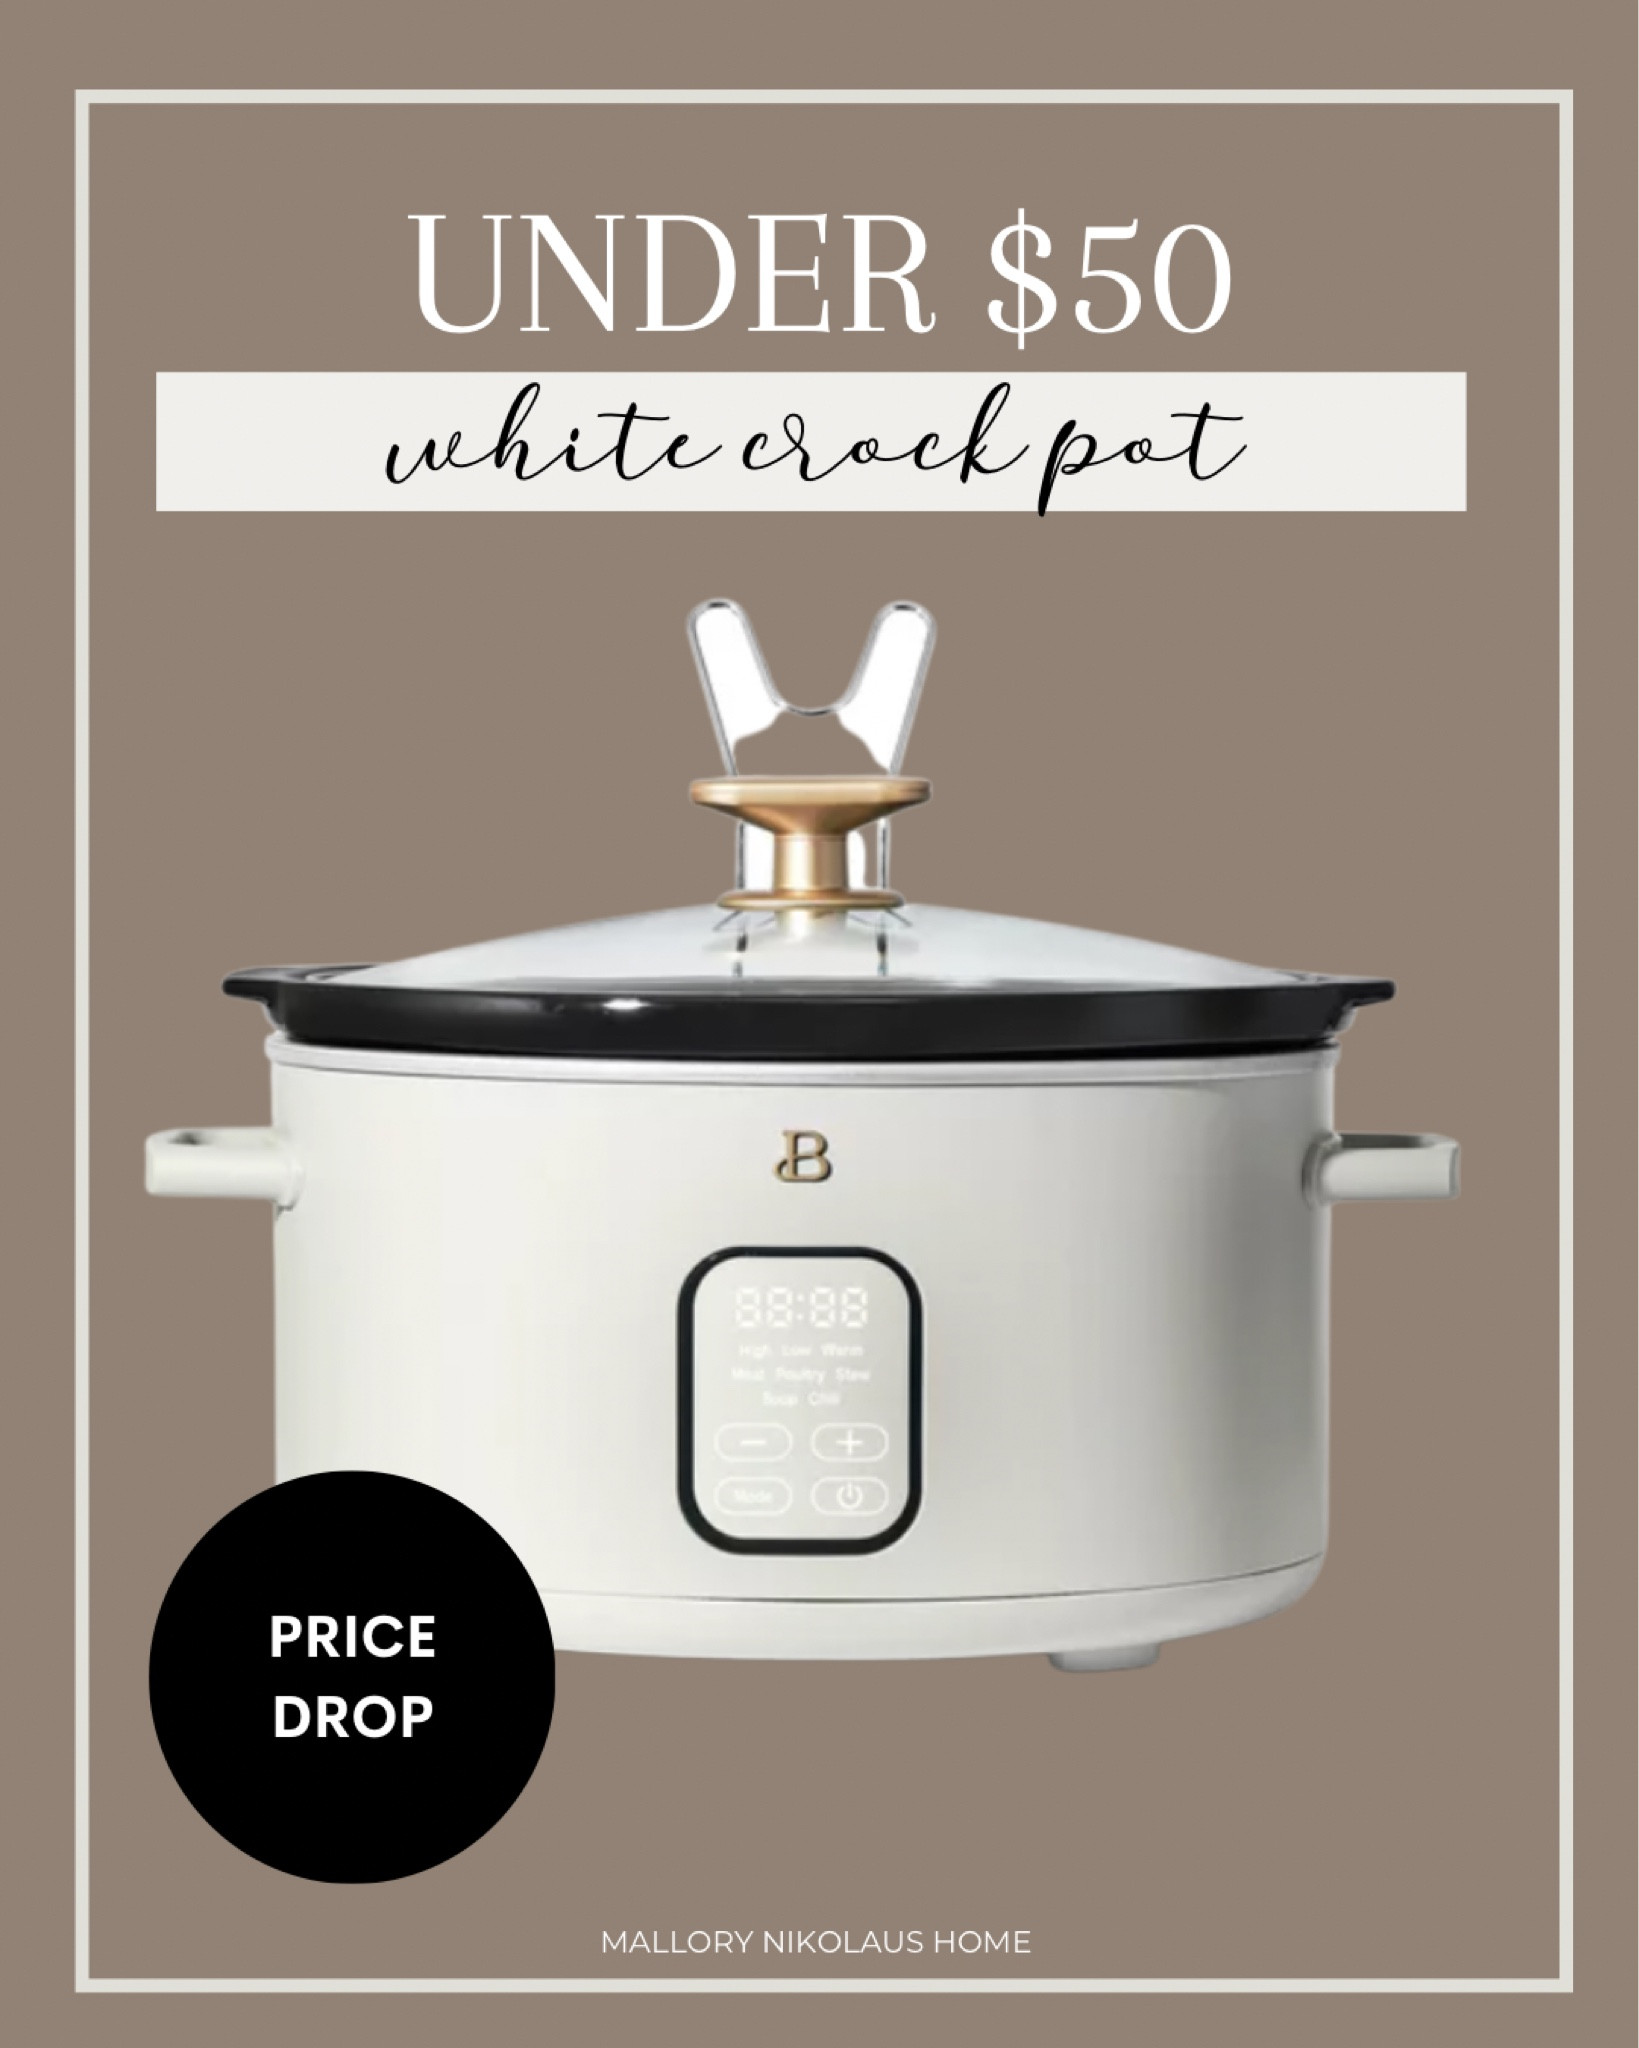  6 Quart Programmable Slow Cooker (White Icing): Home